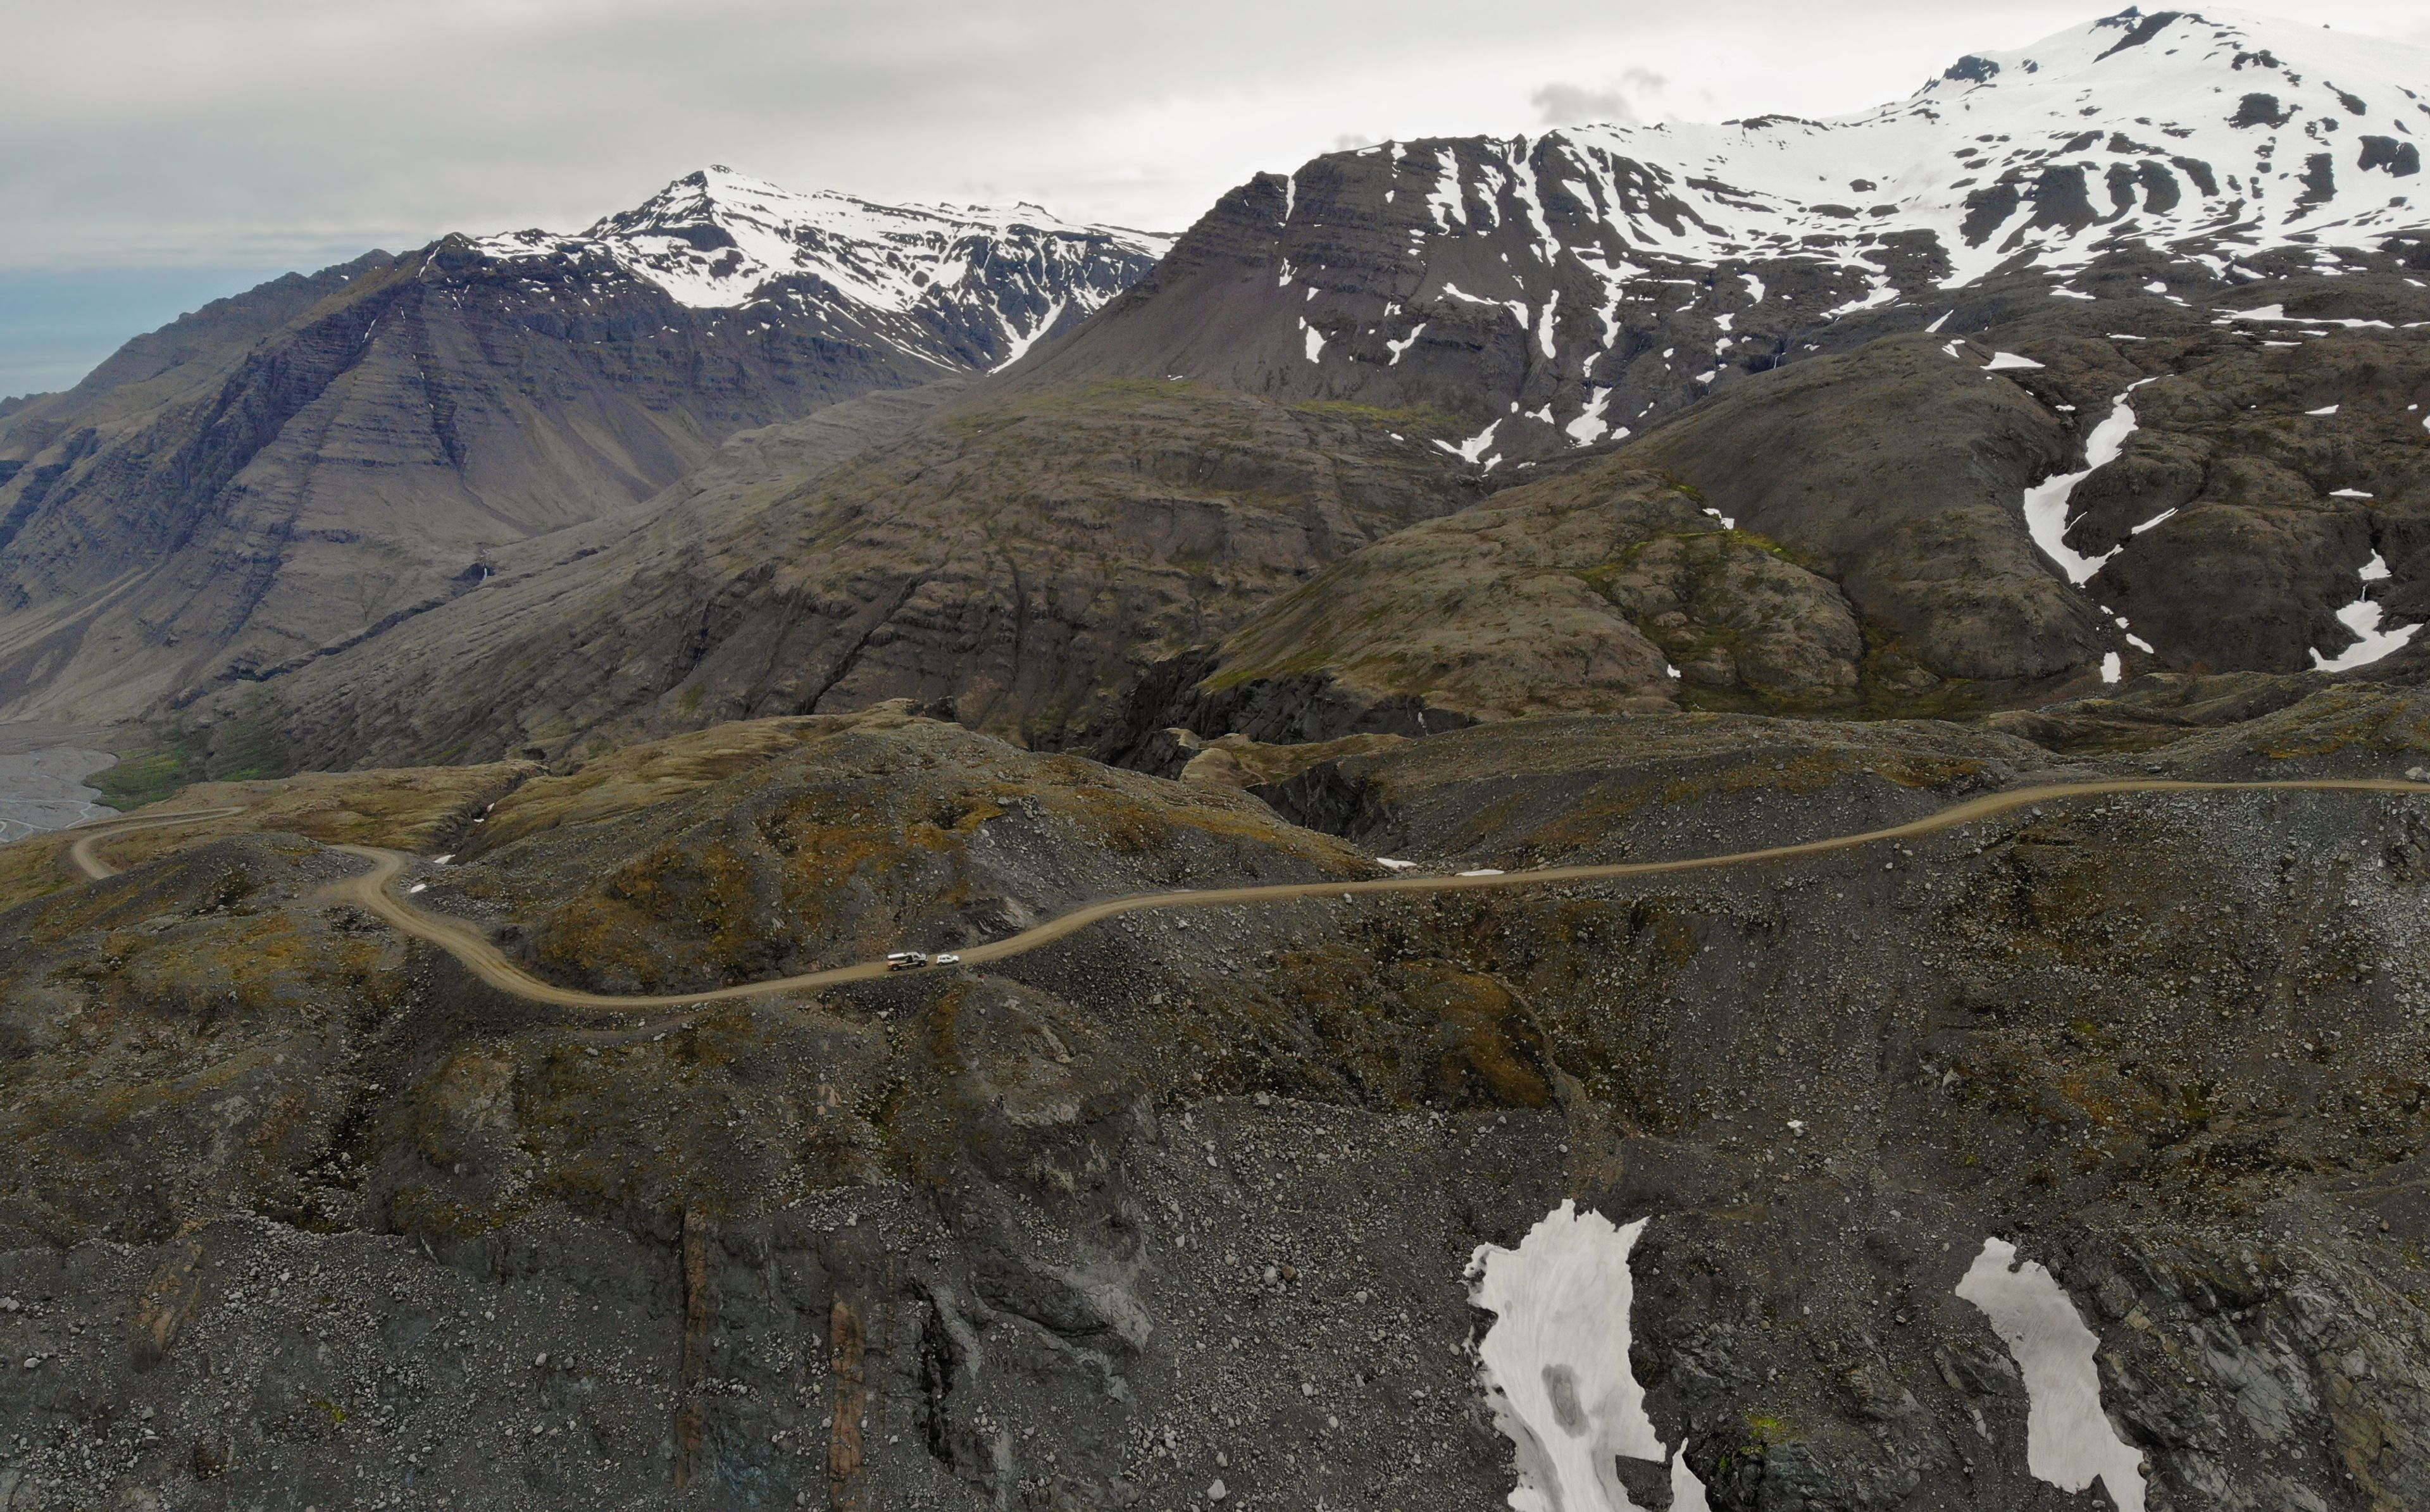 Aerial view of mountain road F985 leading to Joklasel and the Skalafellsjokull glacier, part of Vatnajökull National Park, Iceland. Panoramic landscape shot by drone camera.